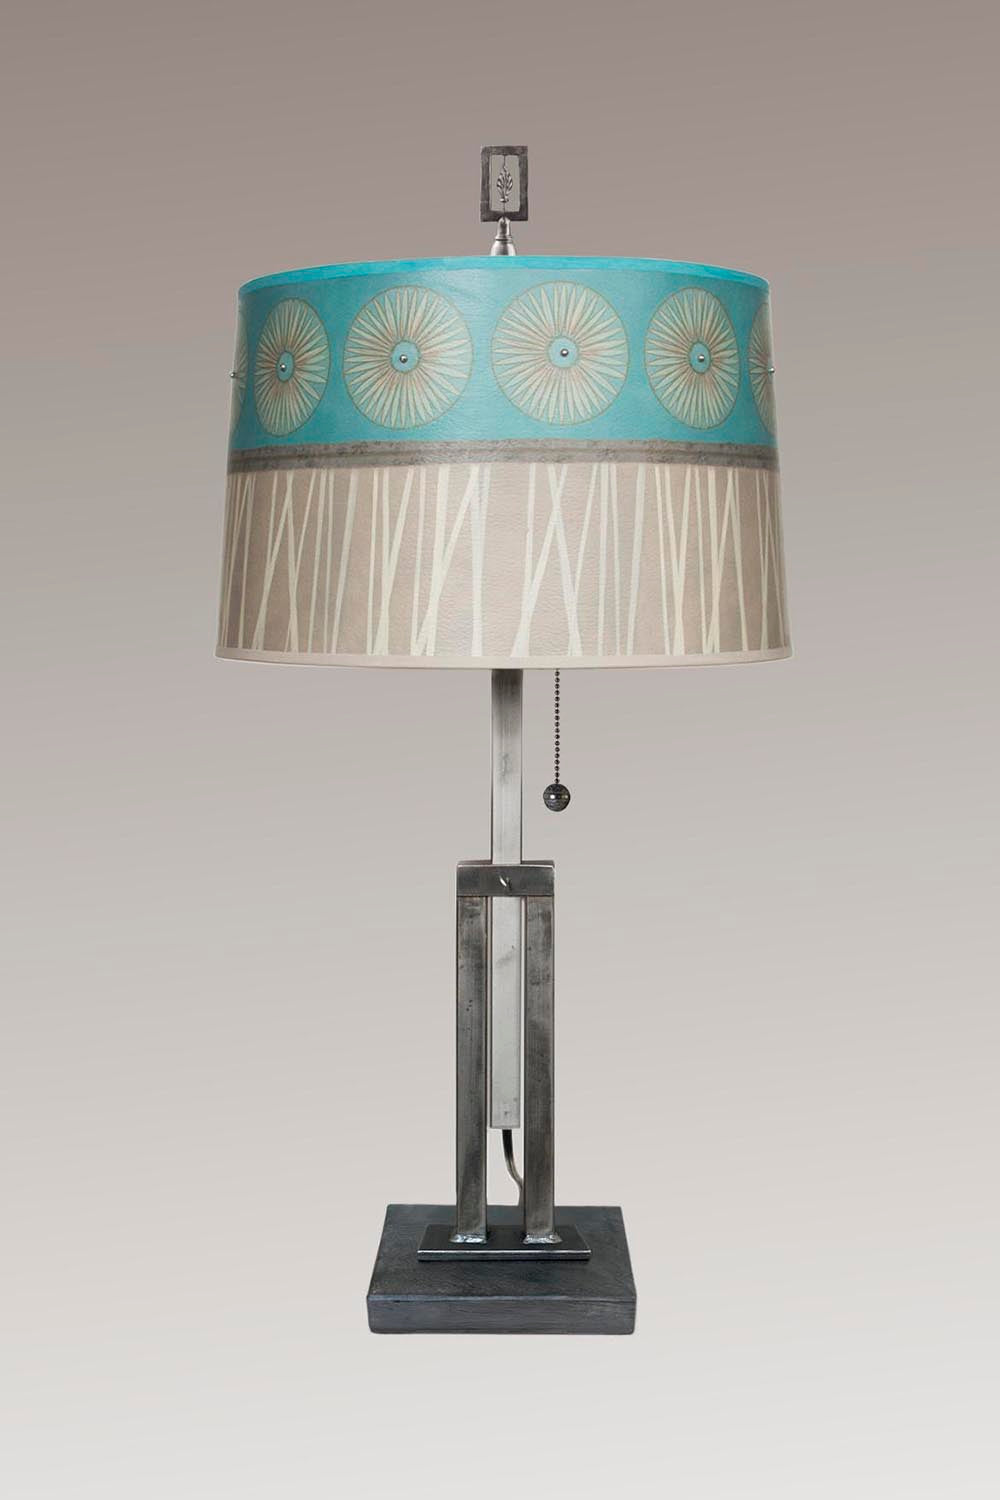 Adjustable-Height Steel Table Lamp with Large Drum Shade in Pool